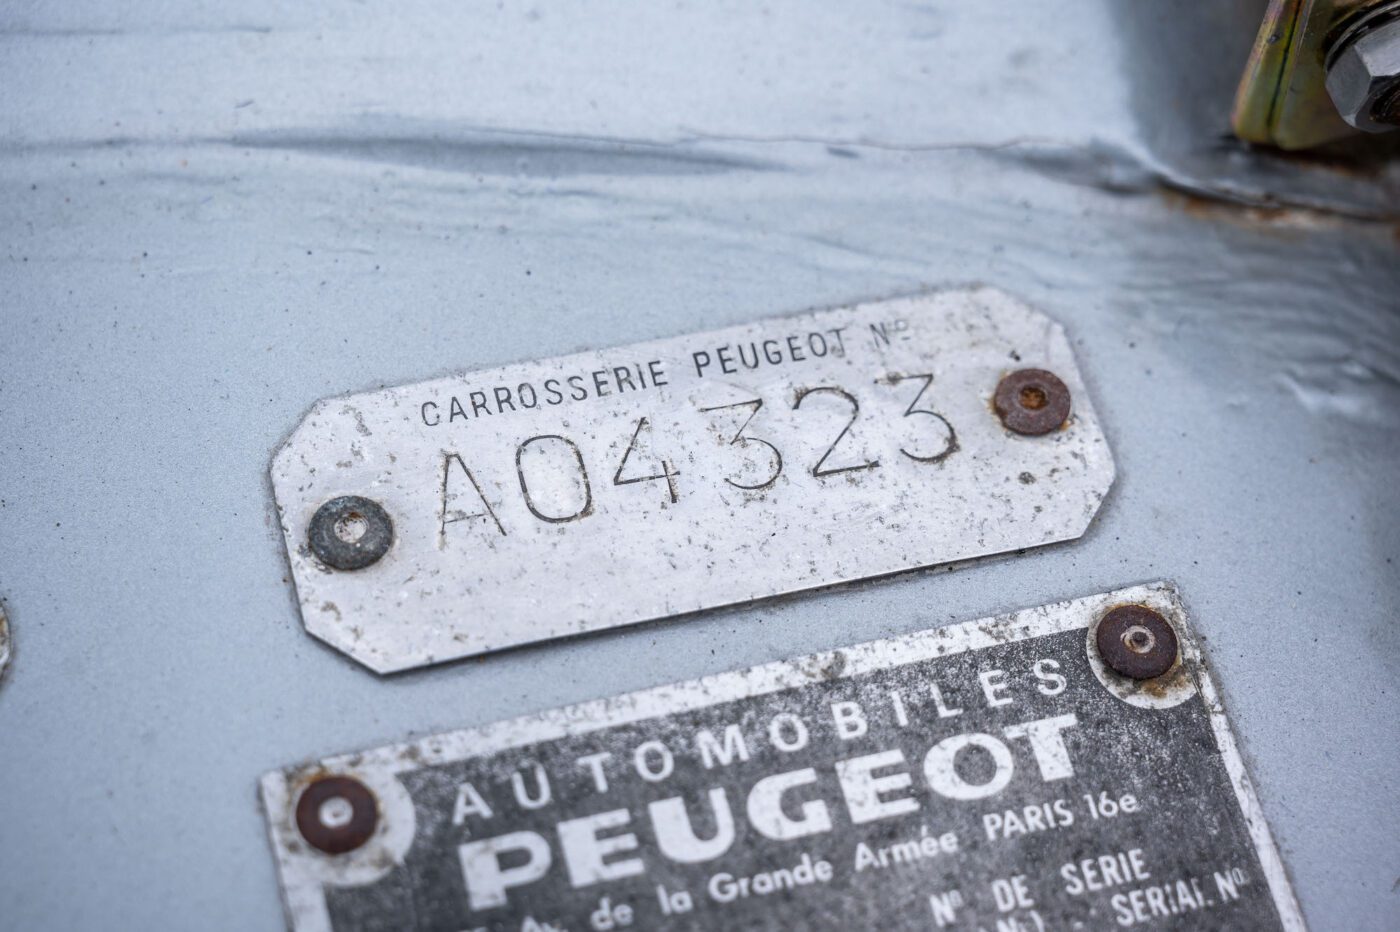 Peugeot 504 Cabriolet chassis plate